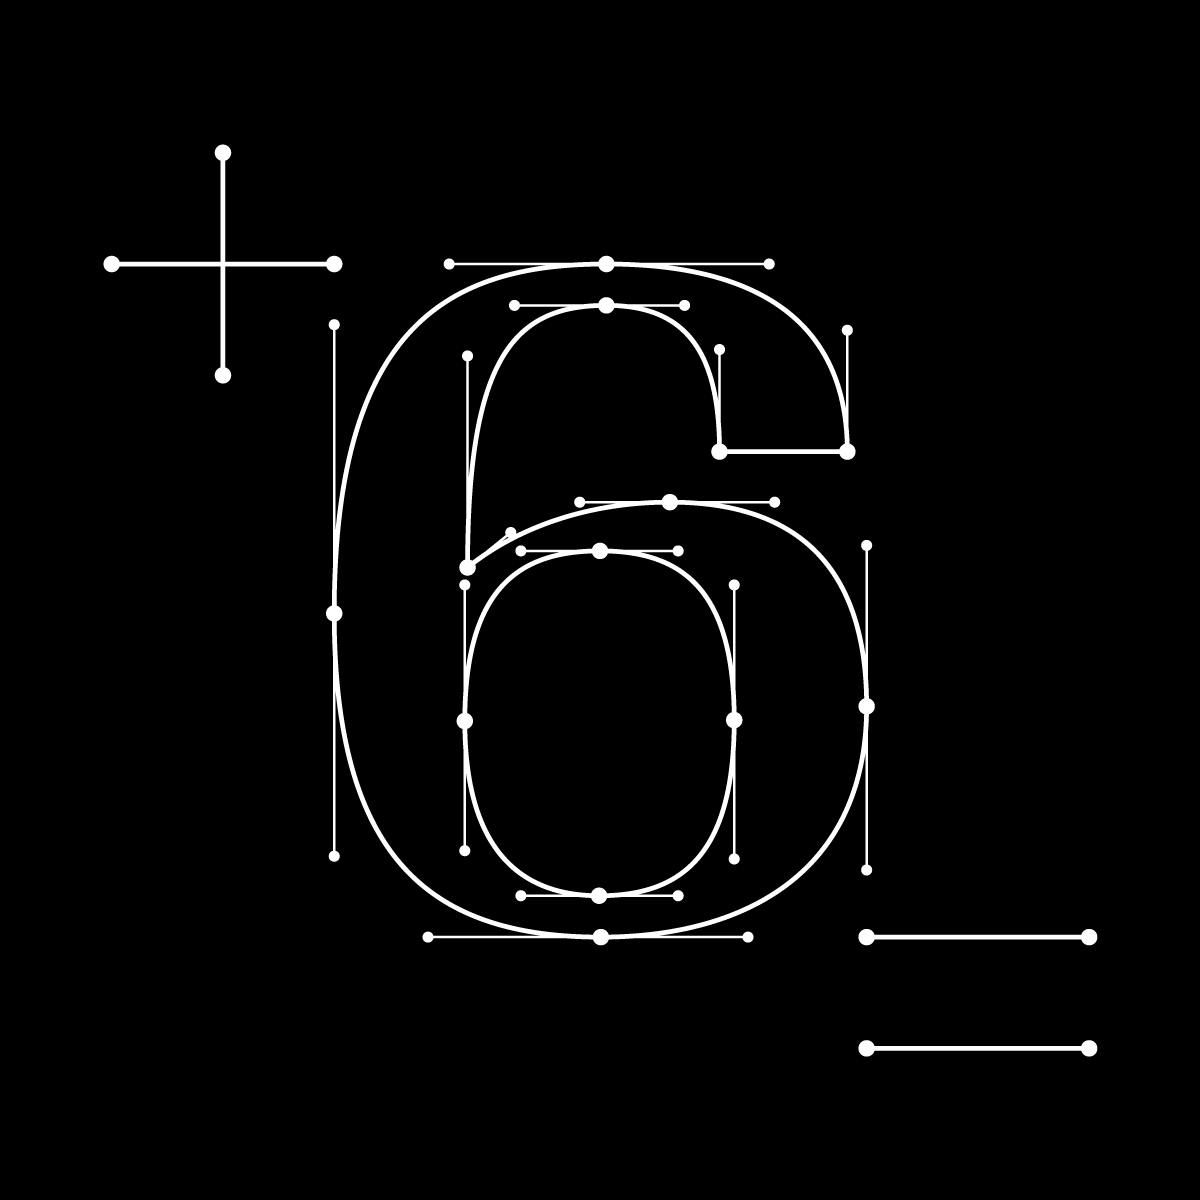 Text reading “+ = 6” stylized as dots with curved and straight lines connecting them